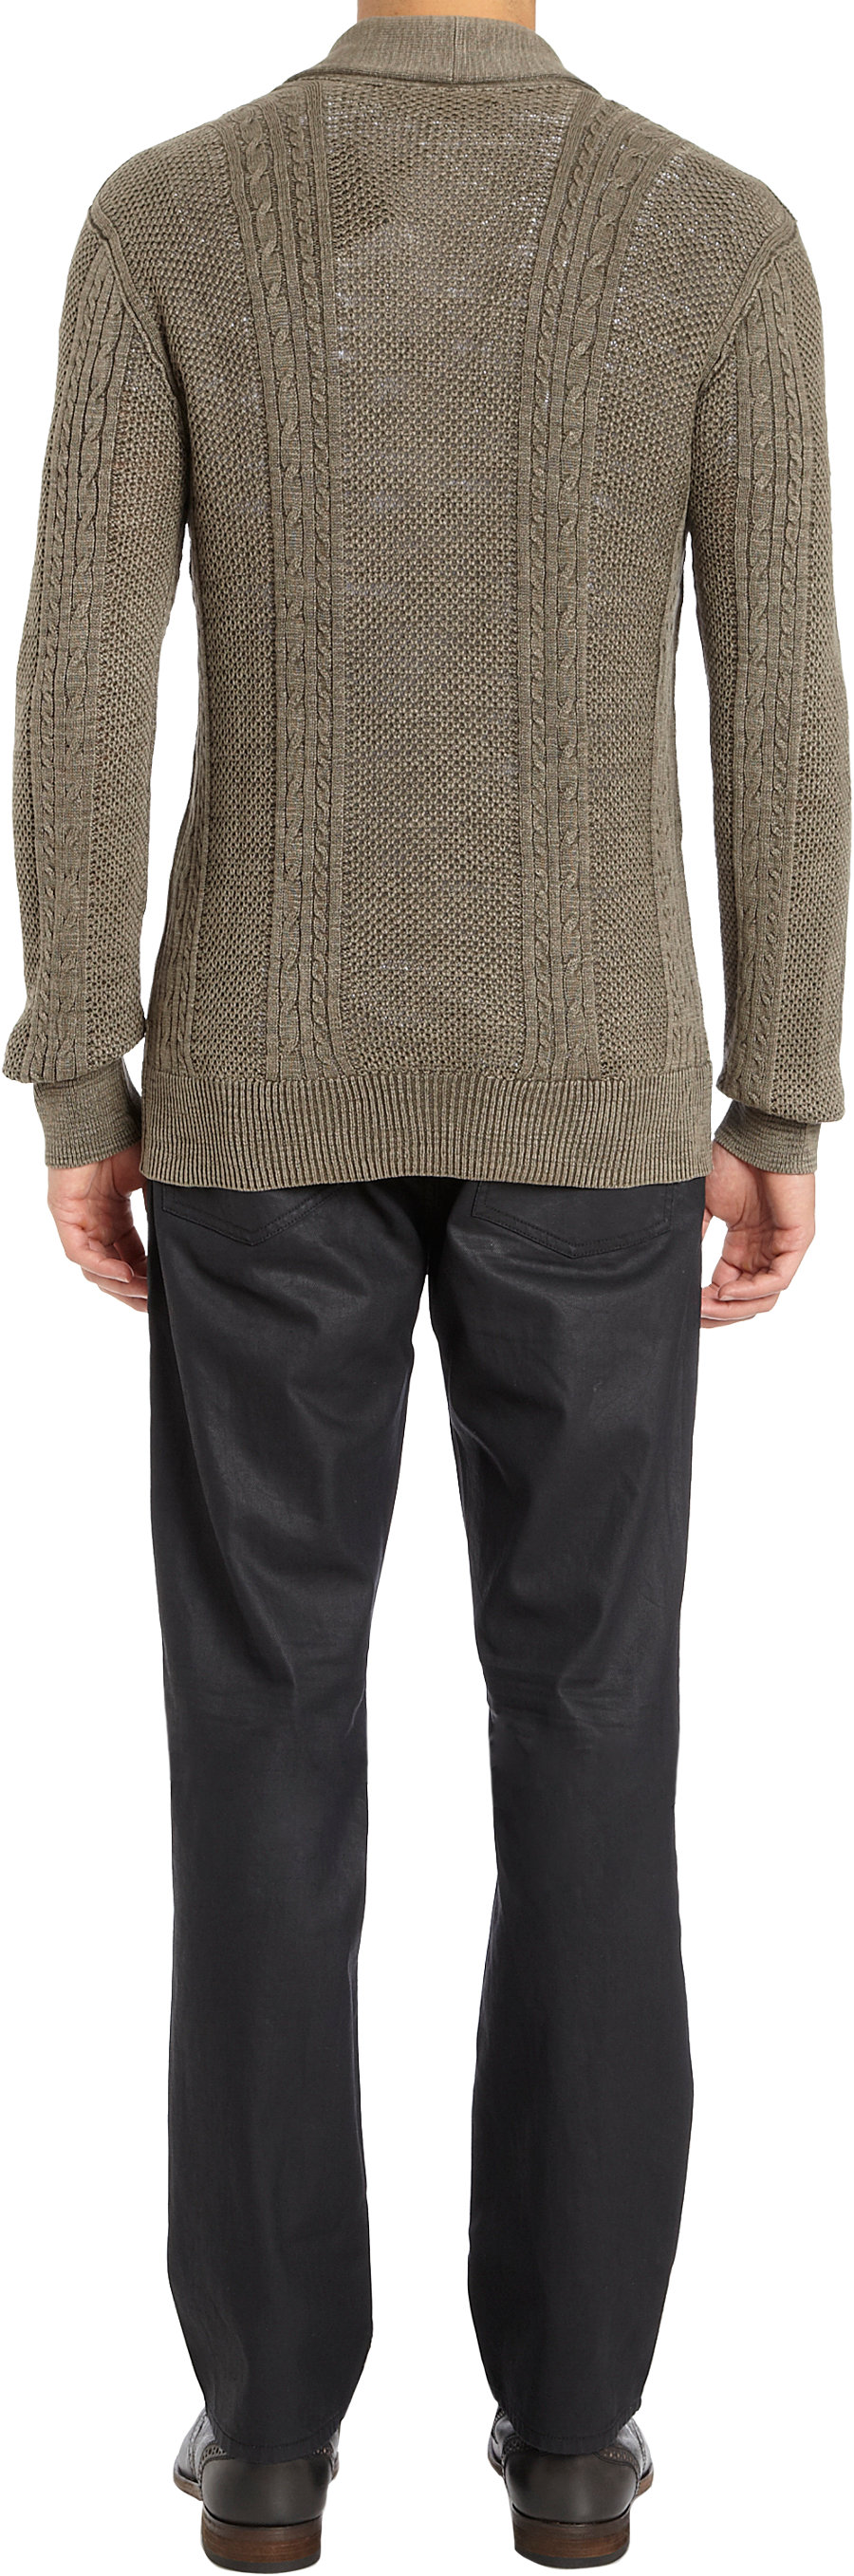 Lyst - John Varvatos Shawl Collar Cable Knit Cardigan in Green for Men